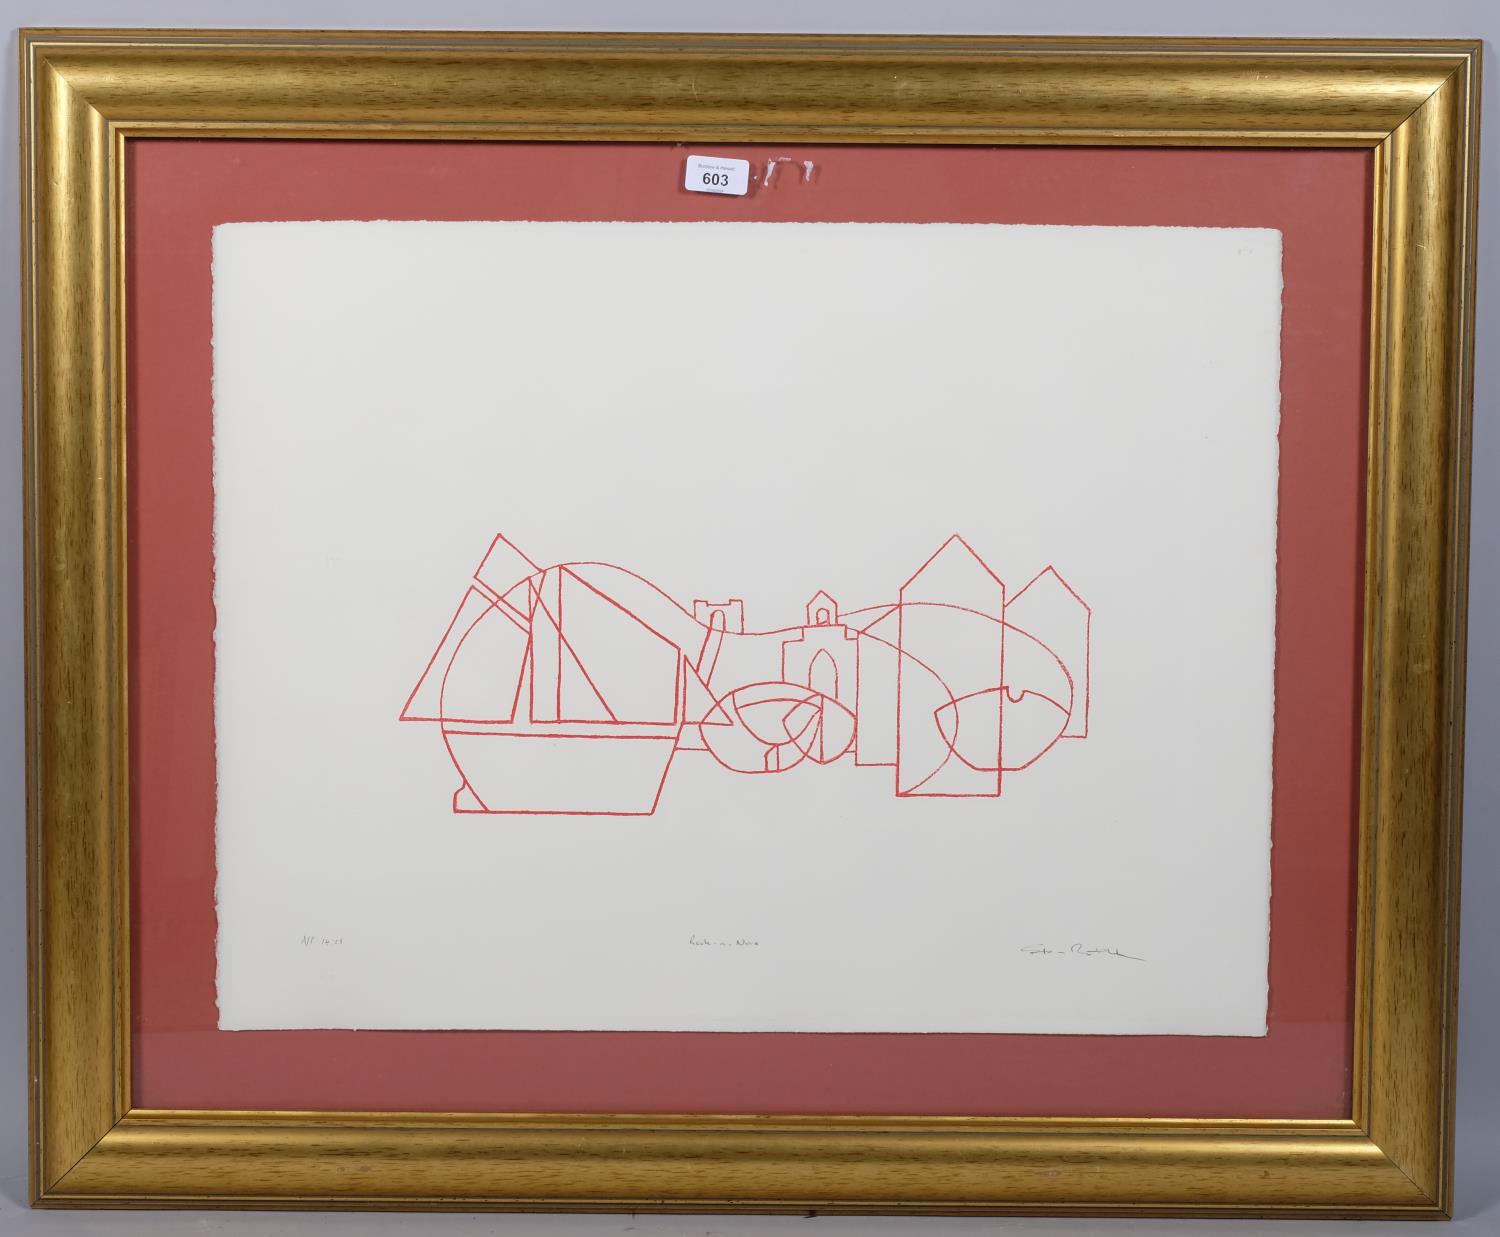 Stan Rosenthal (1933 - 2012), Rock-a-Nore, screenprint, artist's proof, signed in pencil, no. 14/25, - Image 2 of 4